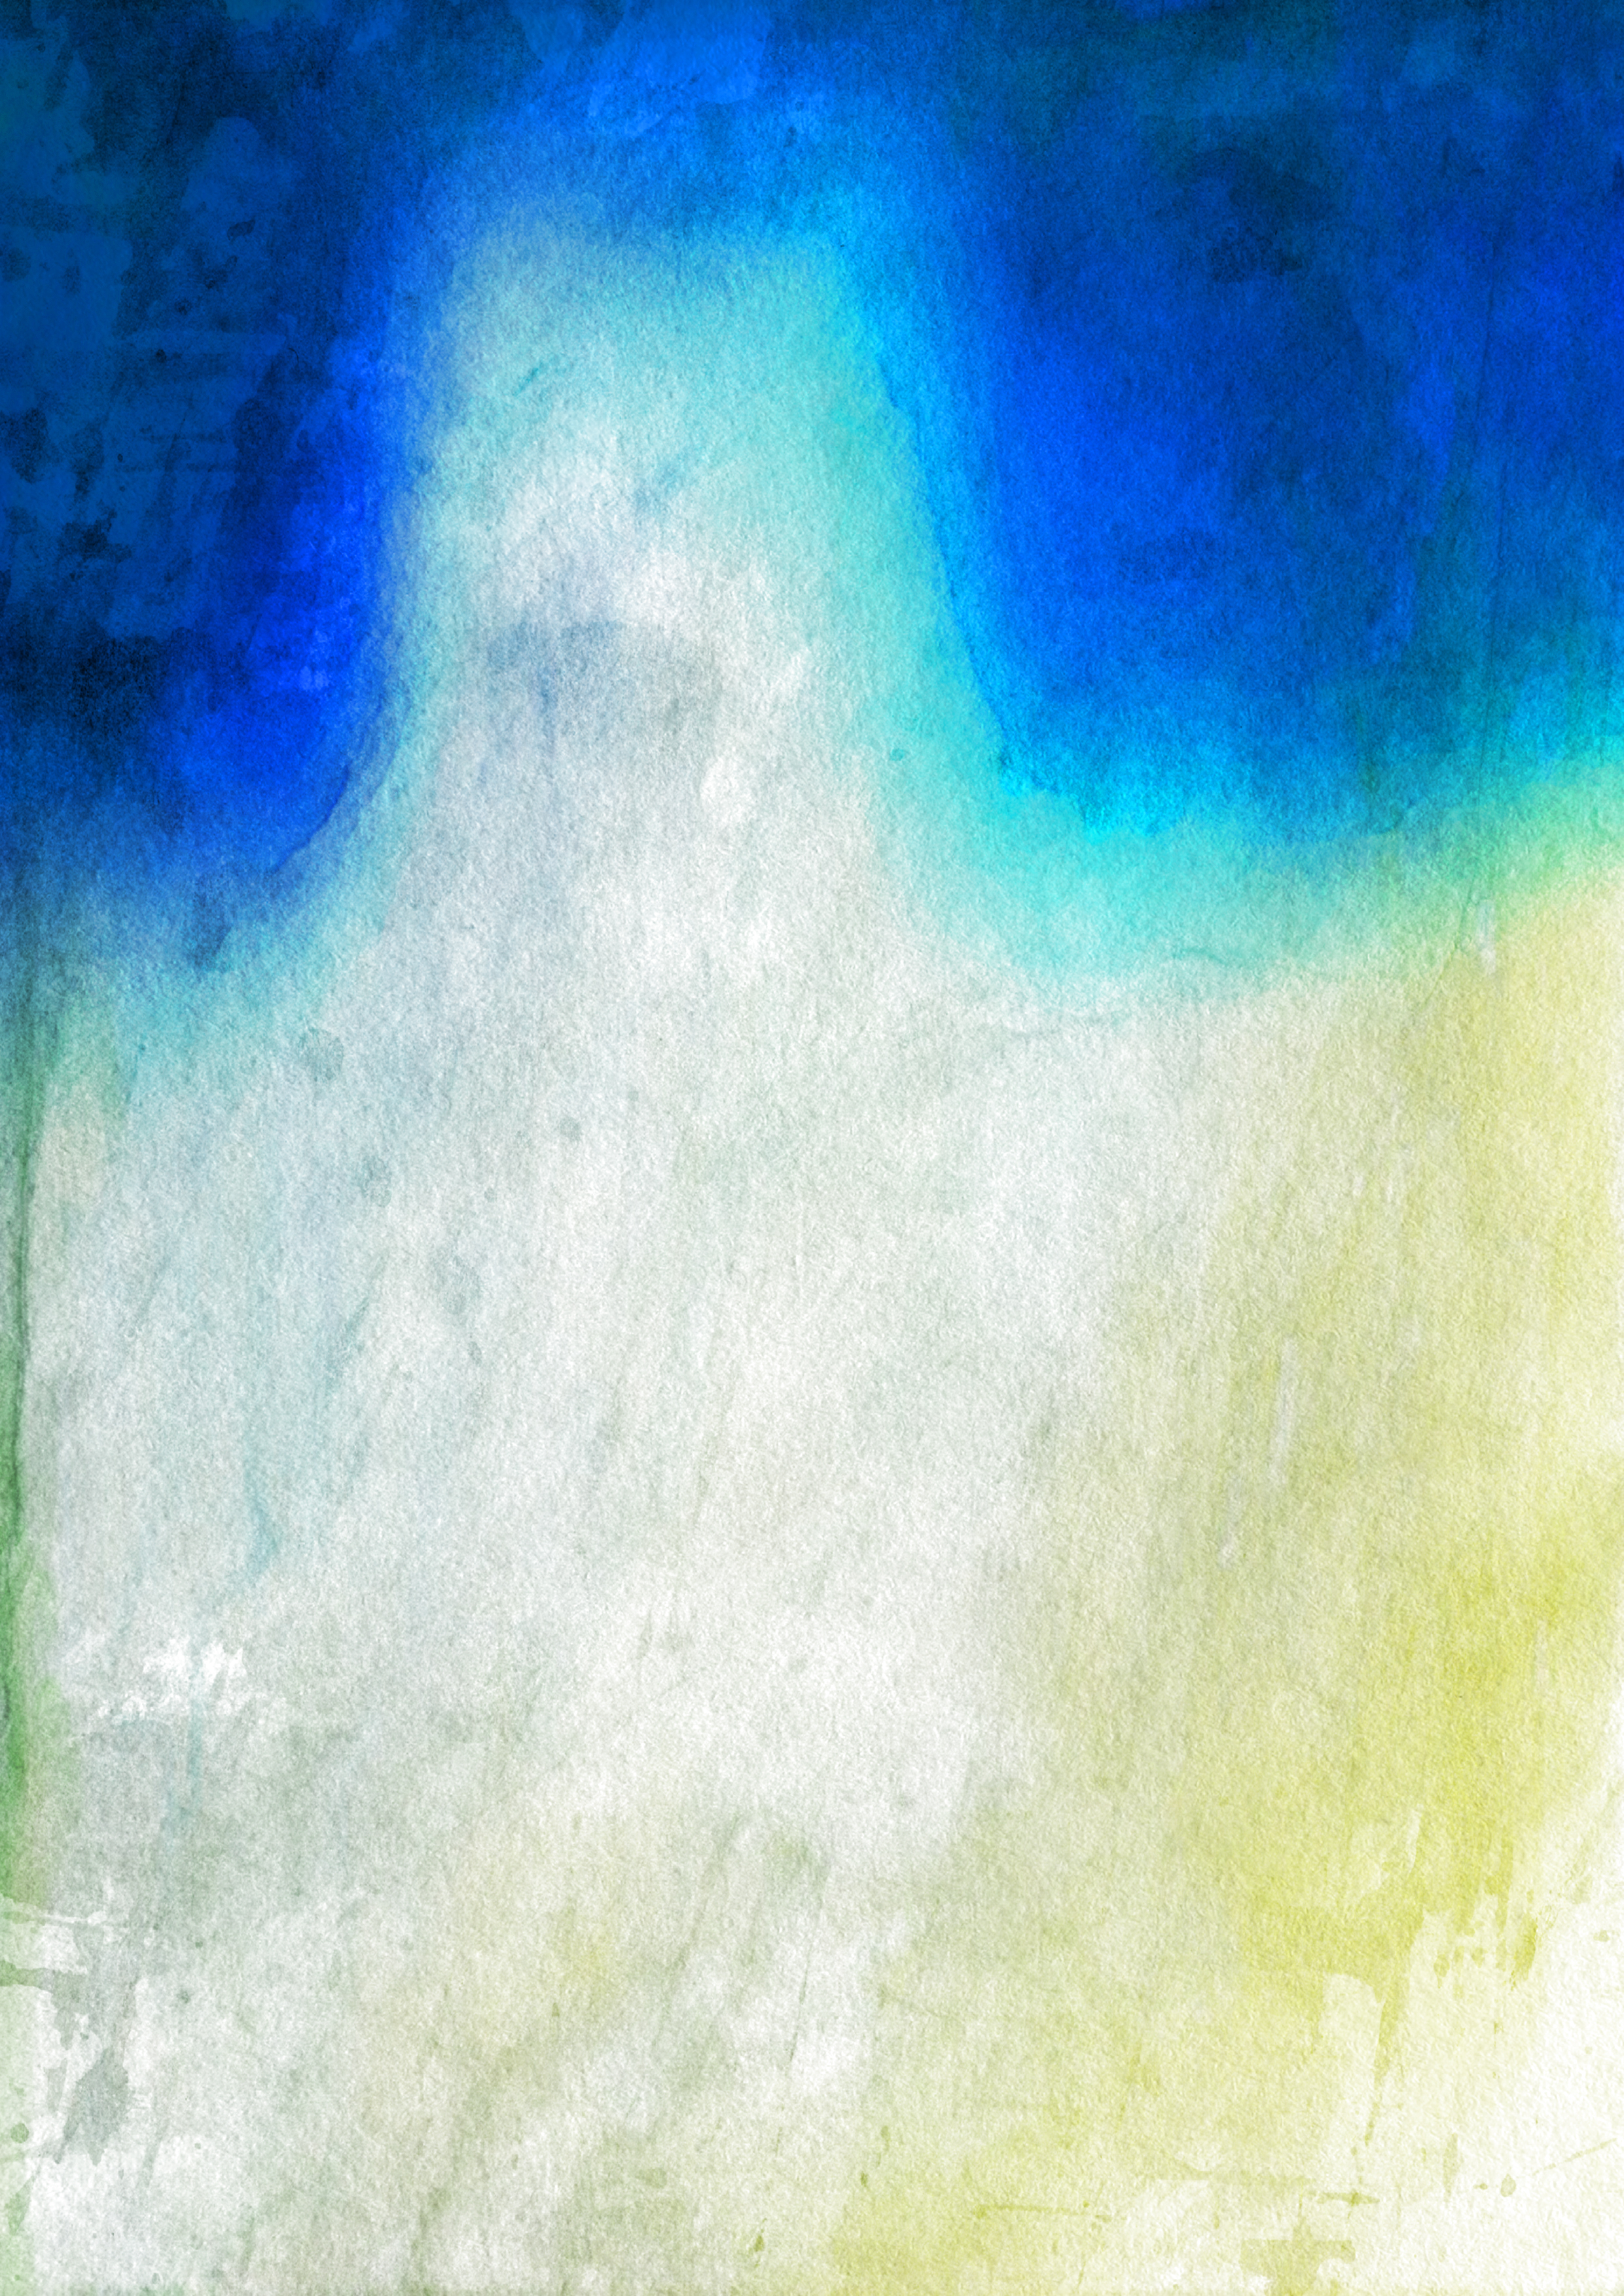 Free Blue Green And White Watercolor Texture Background